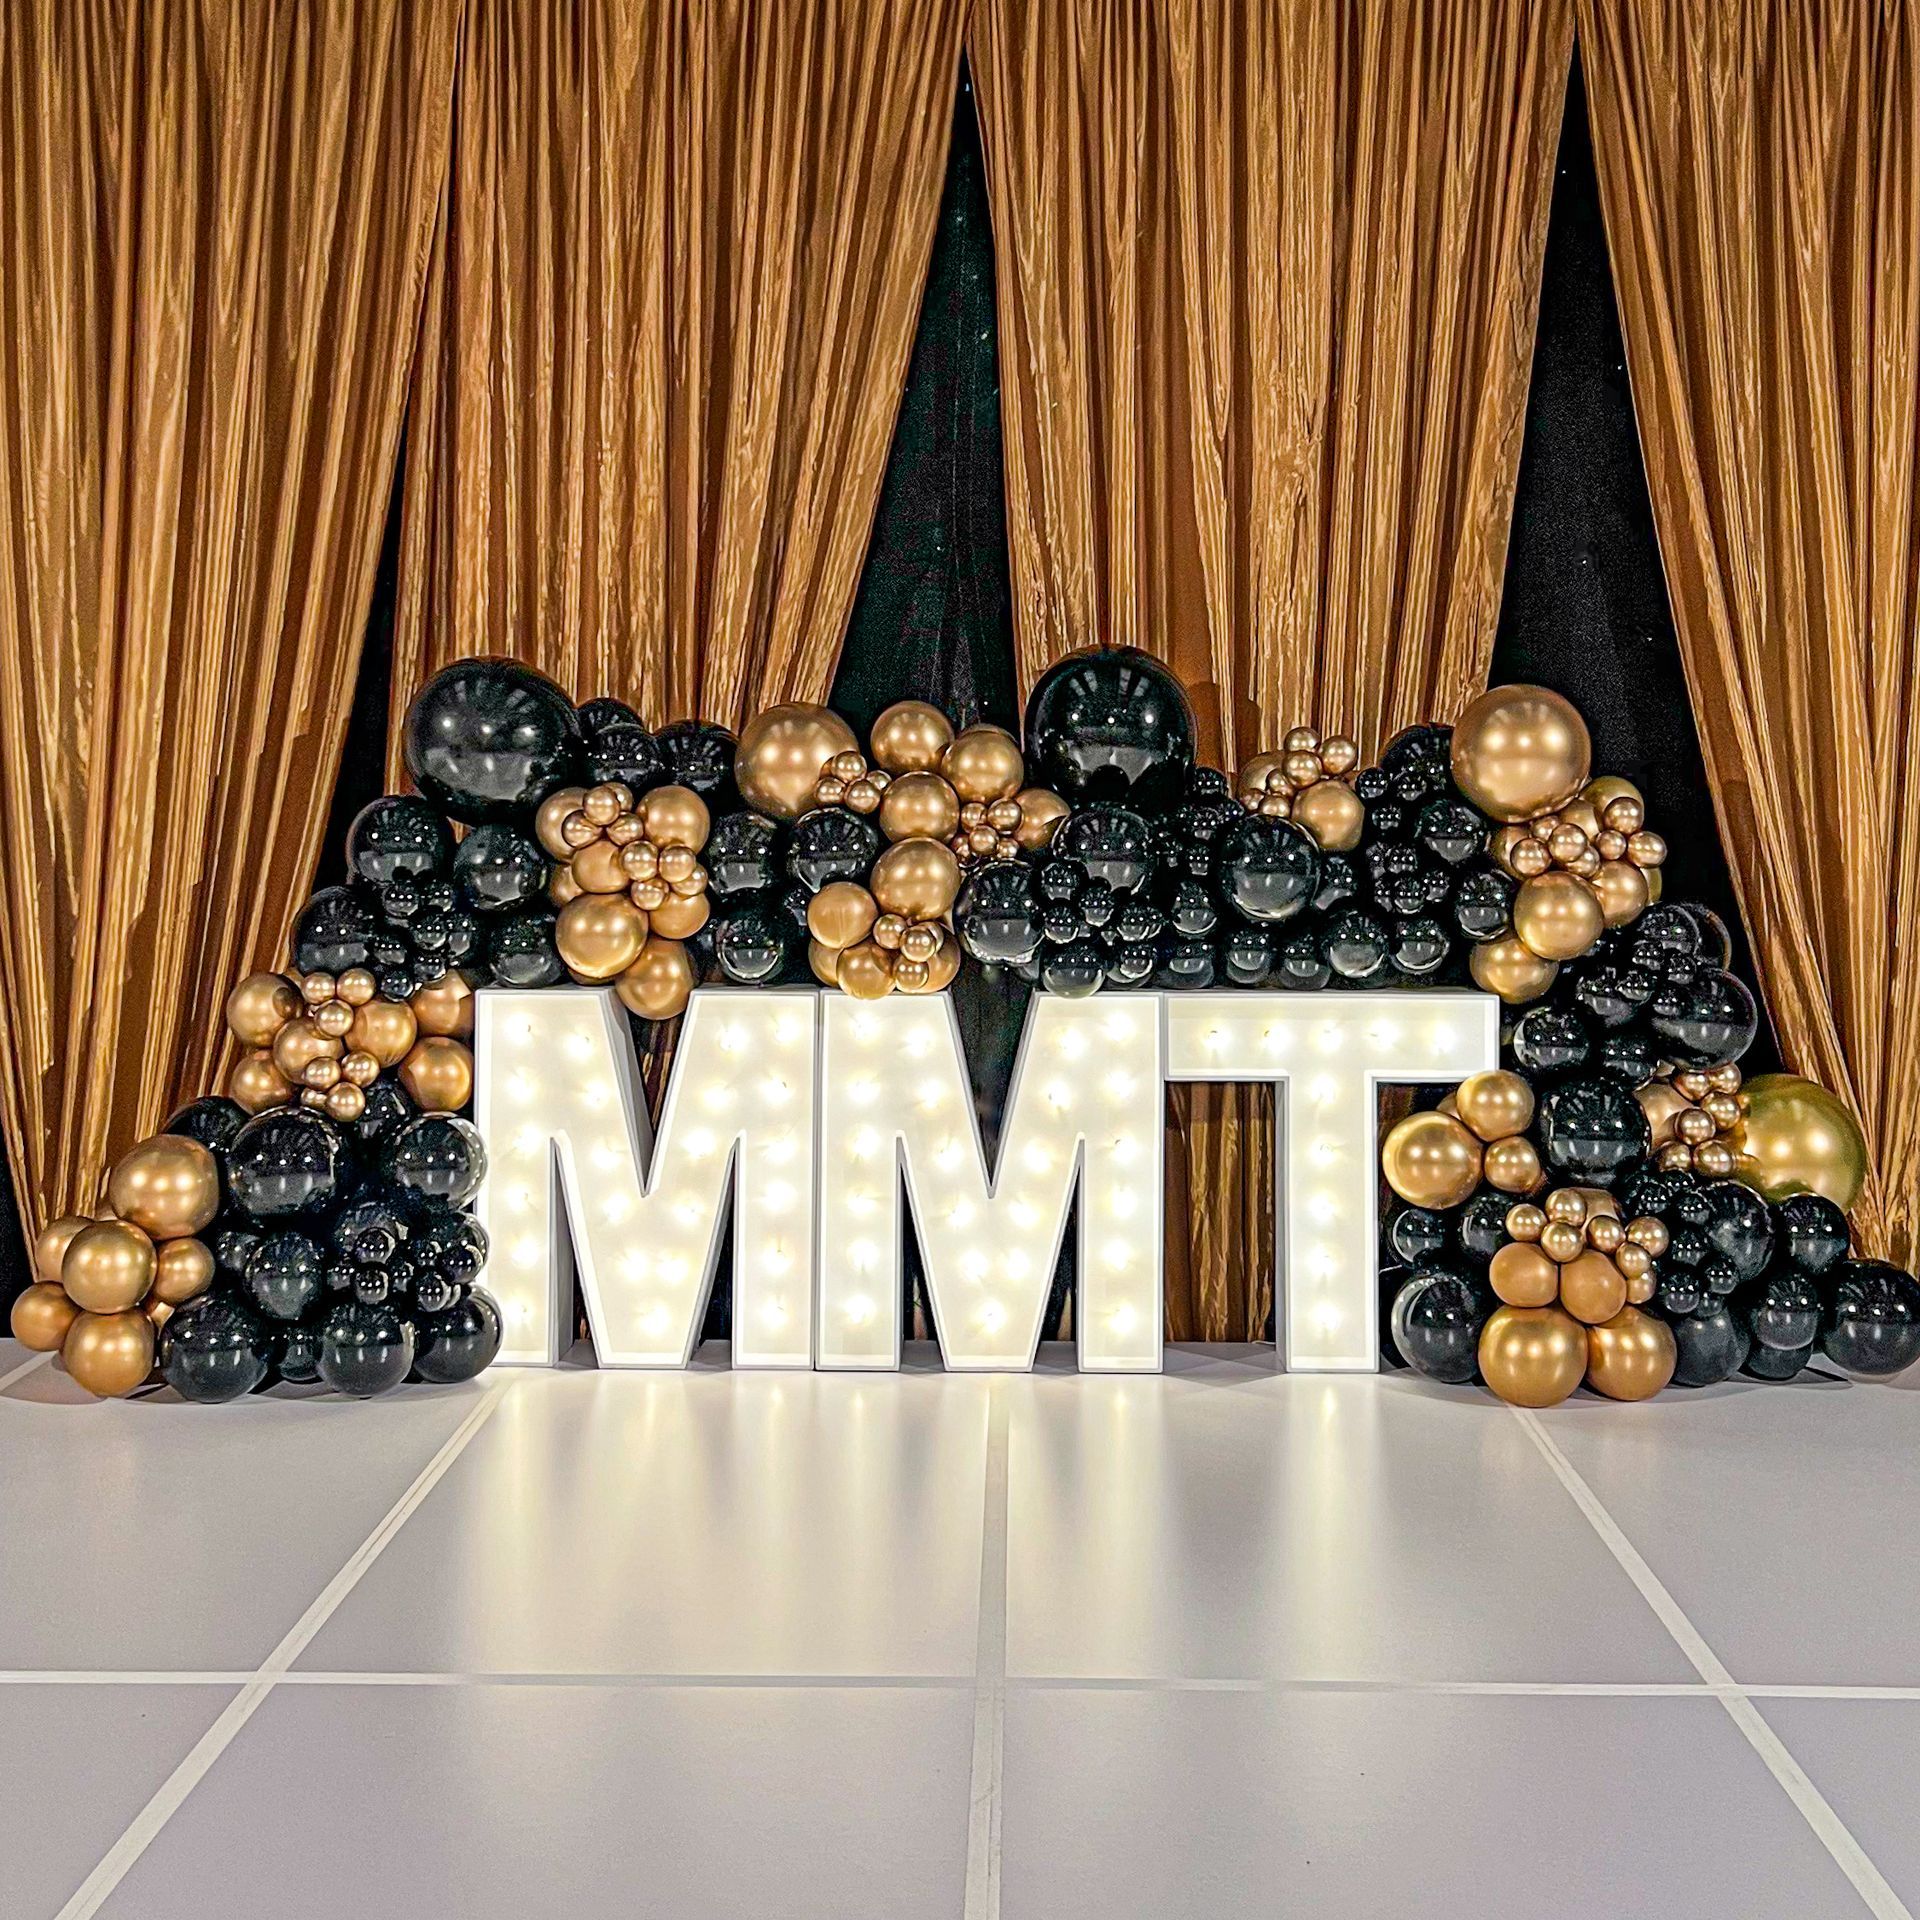 The word mmt is surrounded by balloons and lights